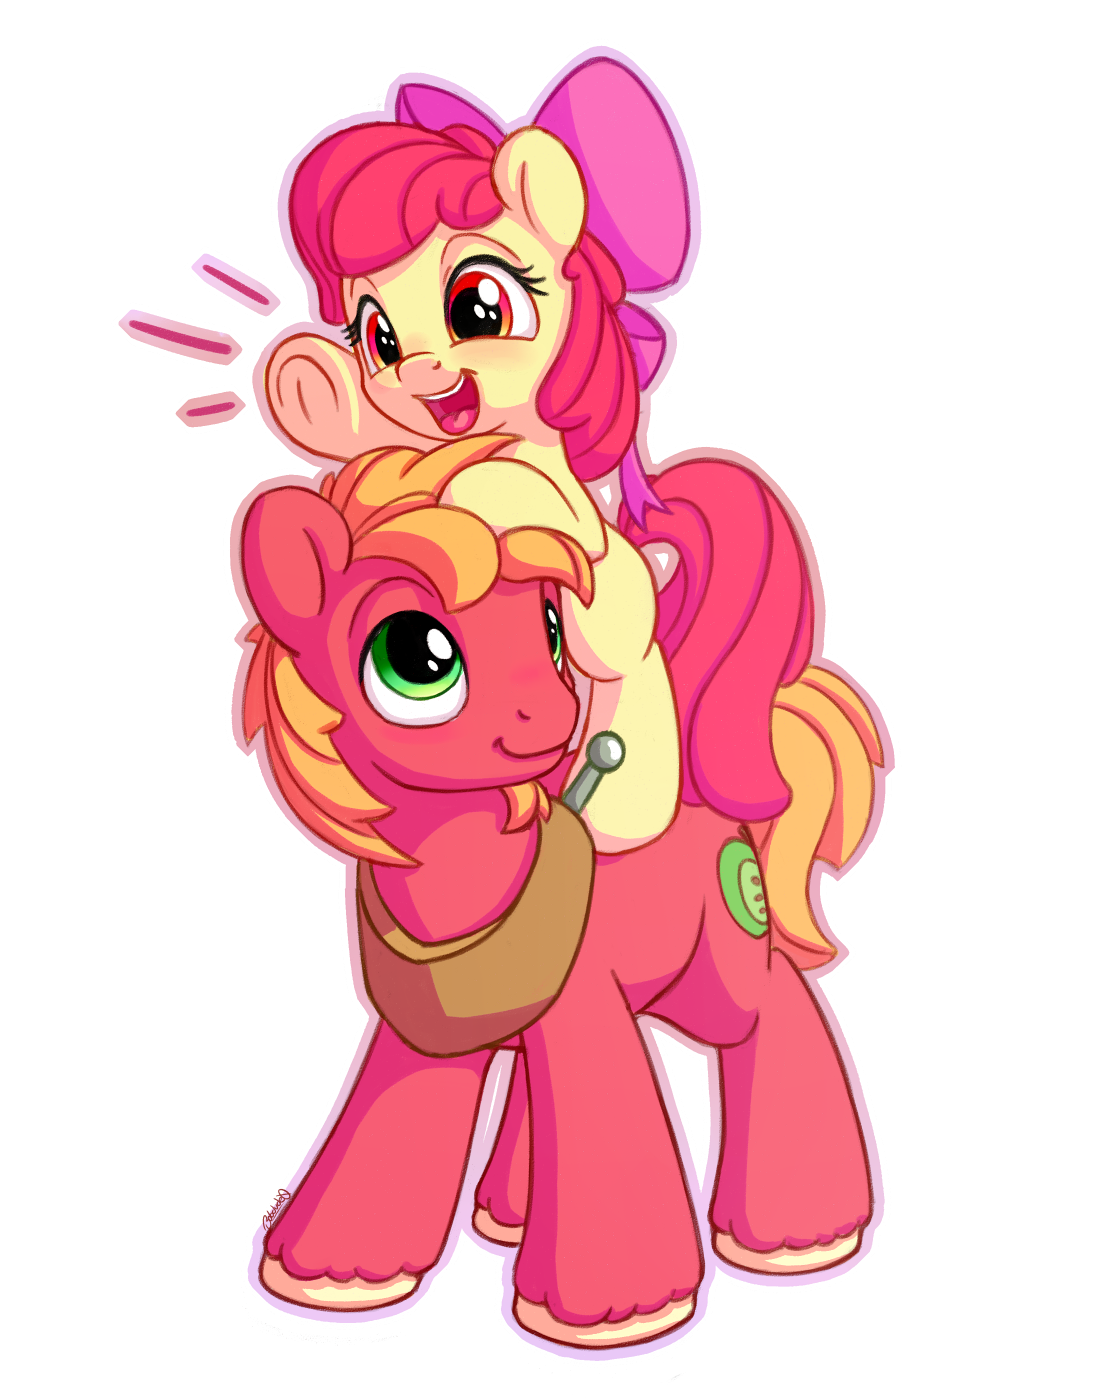 bobdude0:A younger Big Mac and Bloom for ya. Why younger, you ask? Because blank